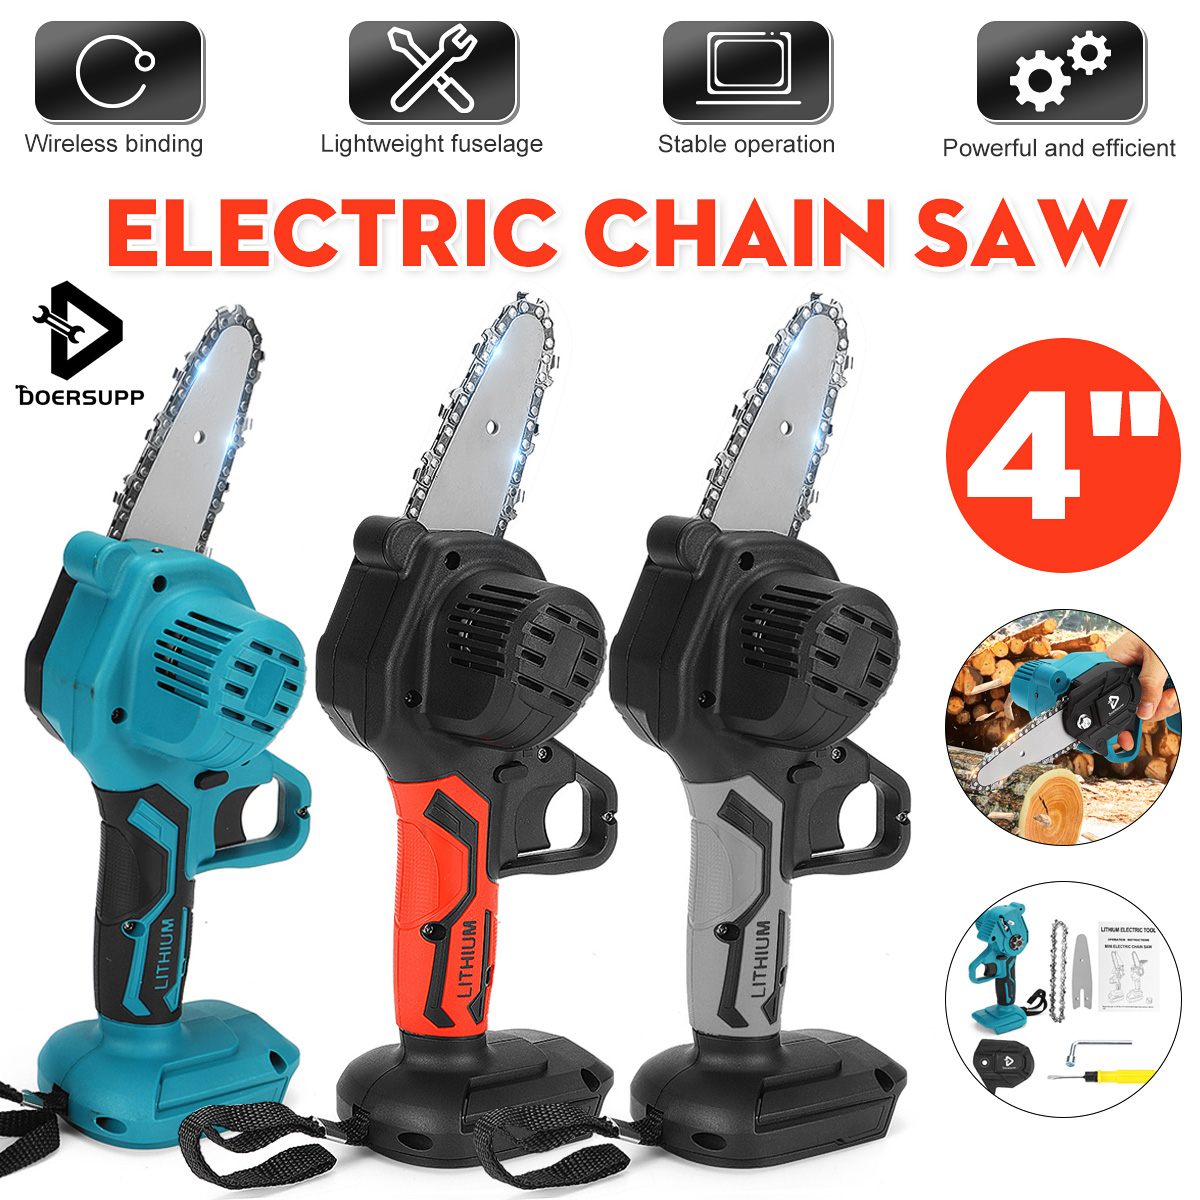 Doersupp-Portable-4Inch-Rechargable-Mini-Electric-Chainsaw-One-handed-Electric-Saws-For-Cutting-Prun-1837617-4